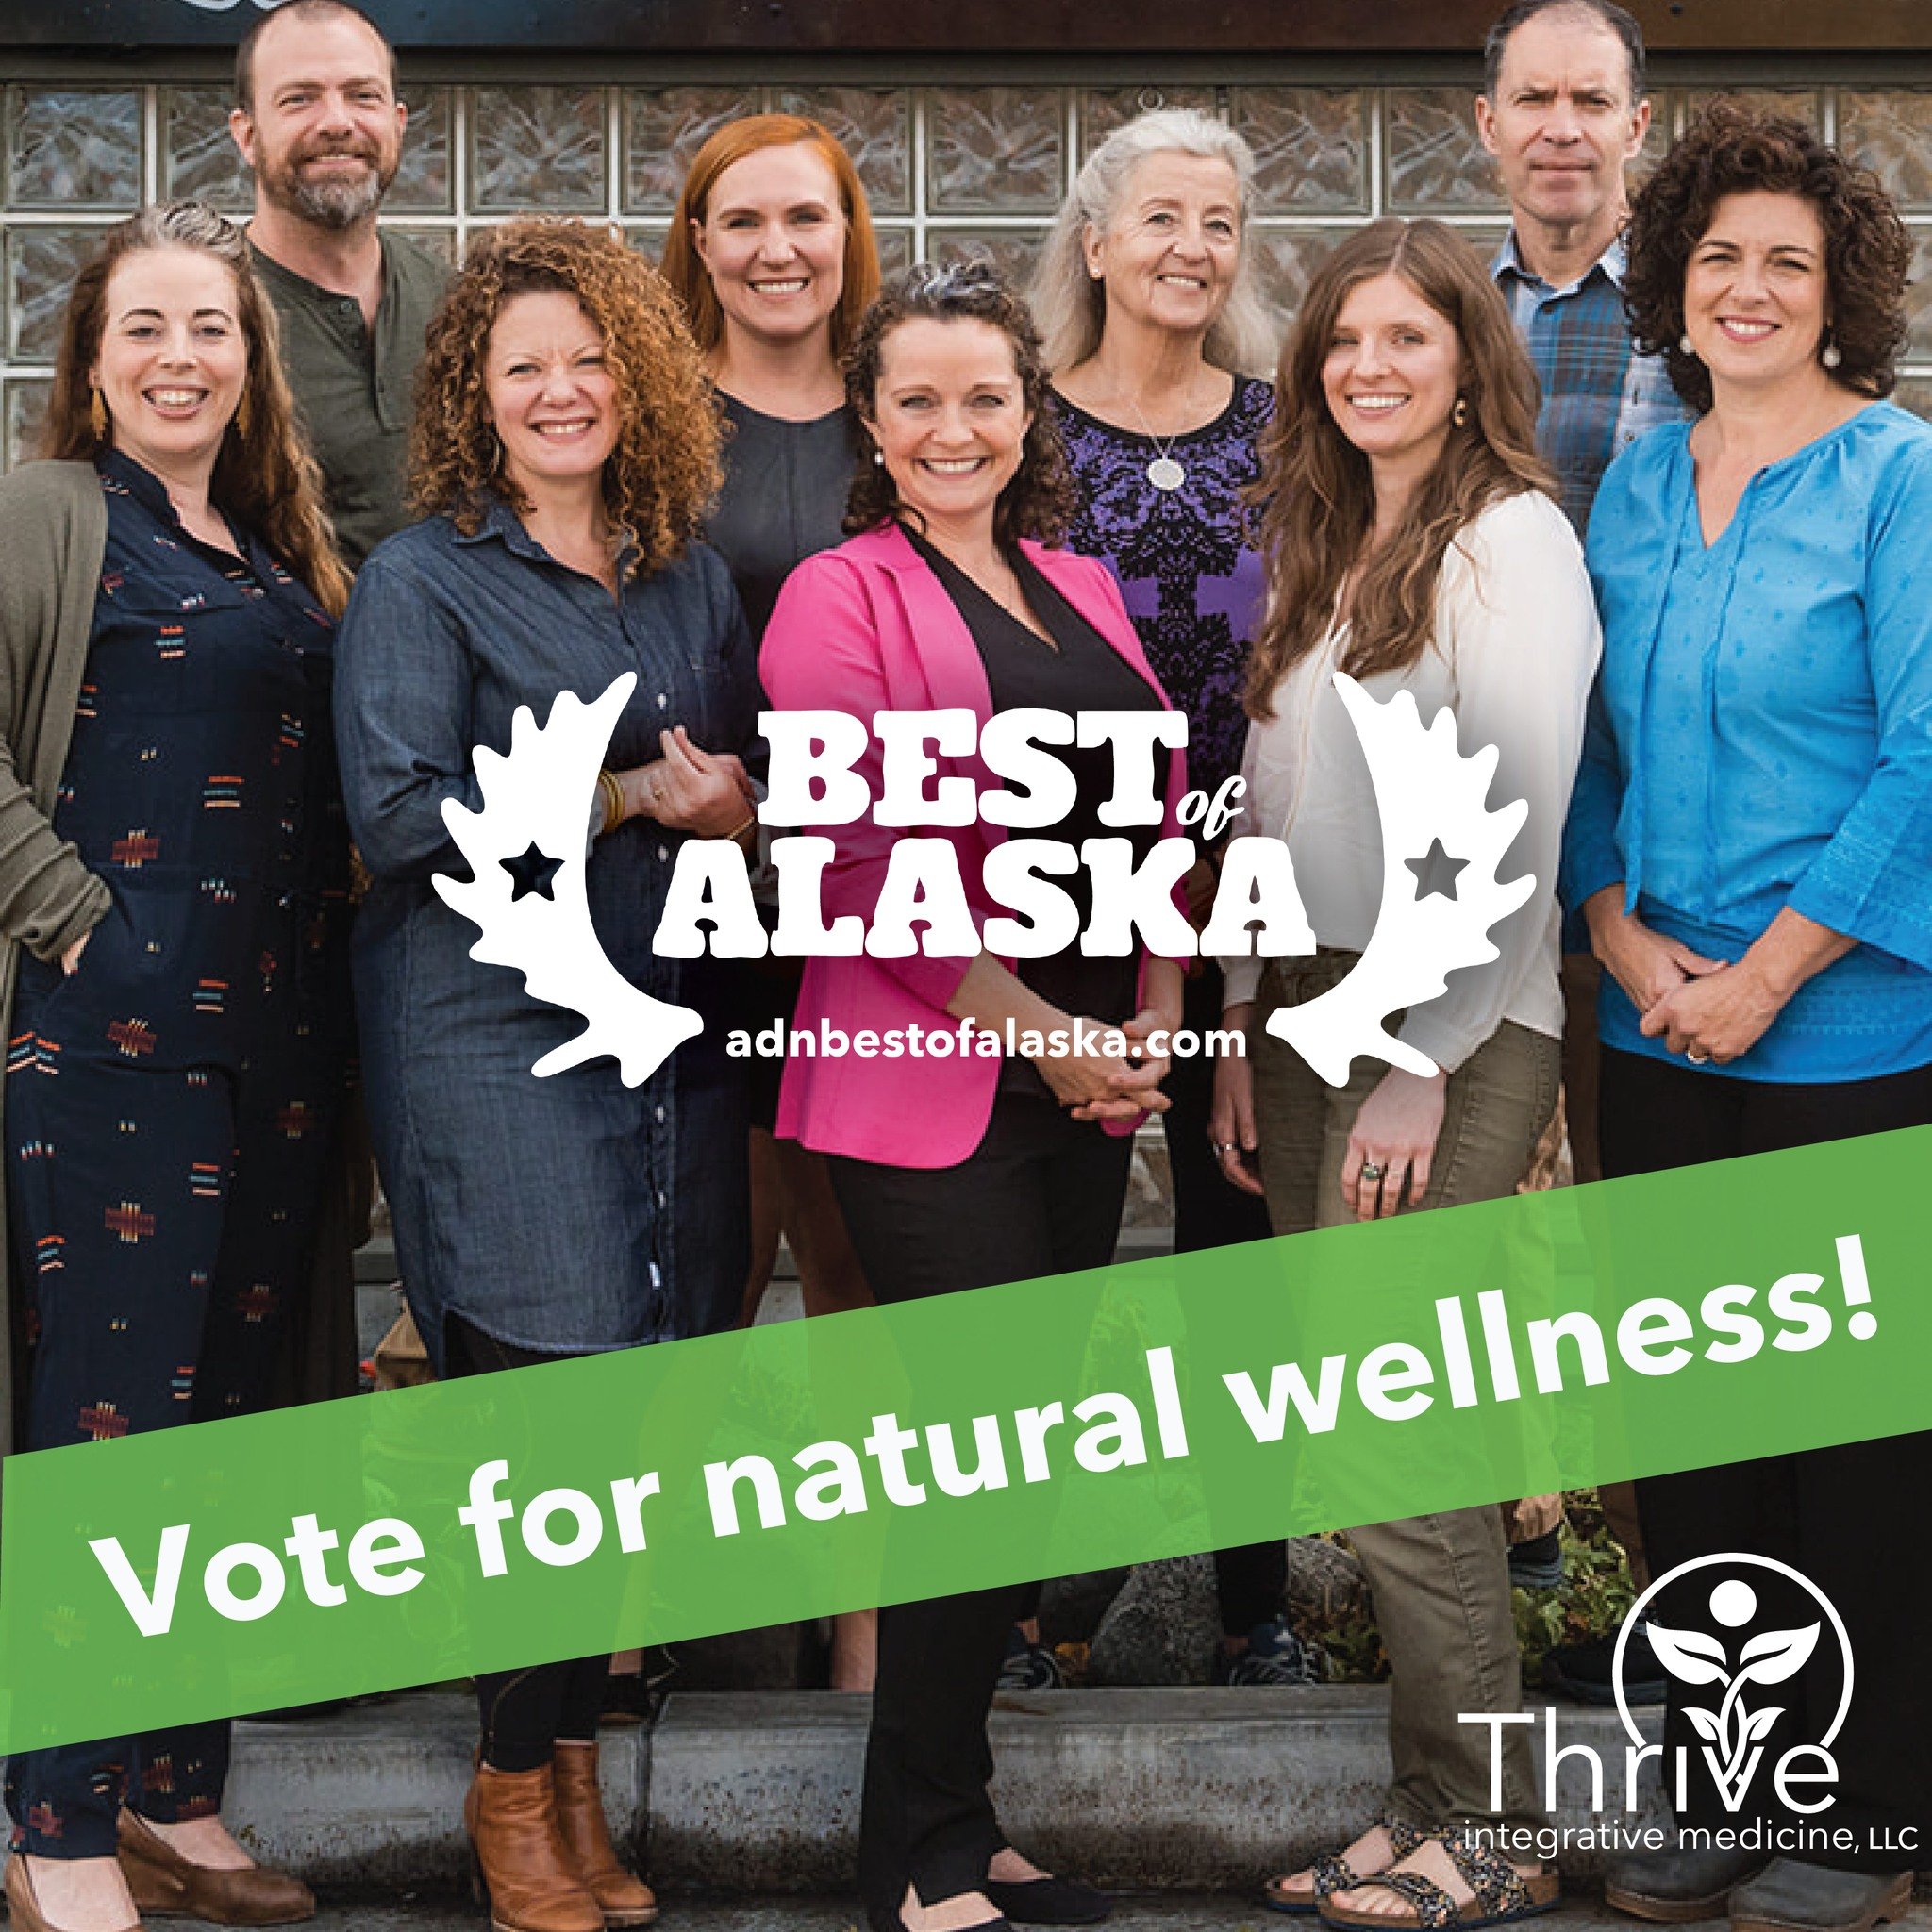 Have We Helped You Thrive? Now It&rsquo;s Time to Help Us!

Cast your vote --&gt; https://www.adnbestofalaska.com/vote#//

This year, we're thrilled to be considered in multiple categories:

- Integrative Medicine
- Naturopathic Care
- Acupuncture
- 